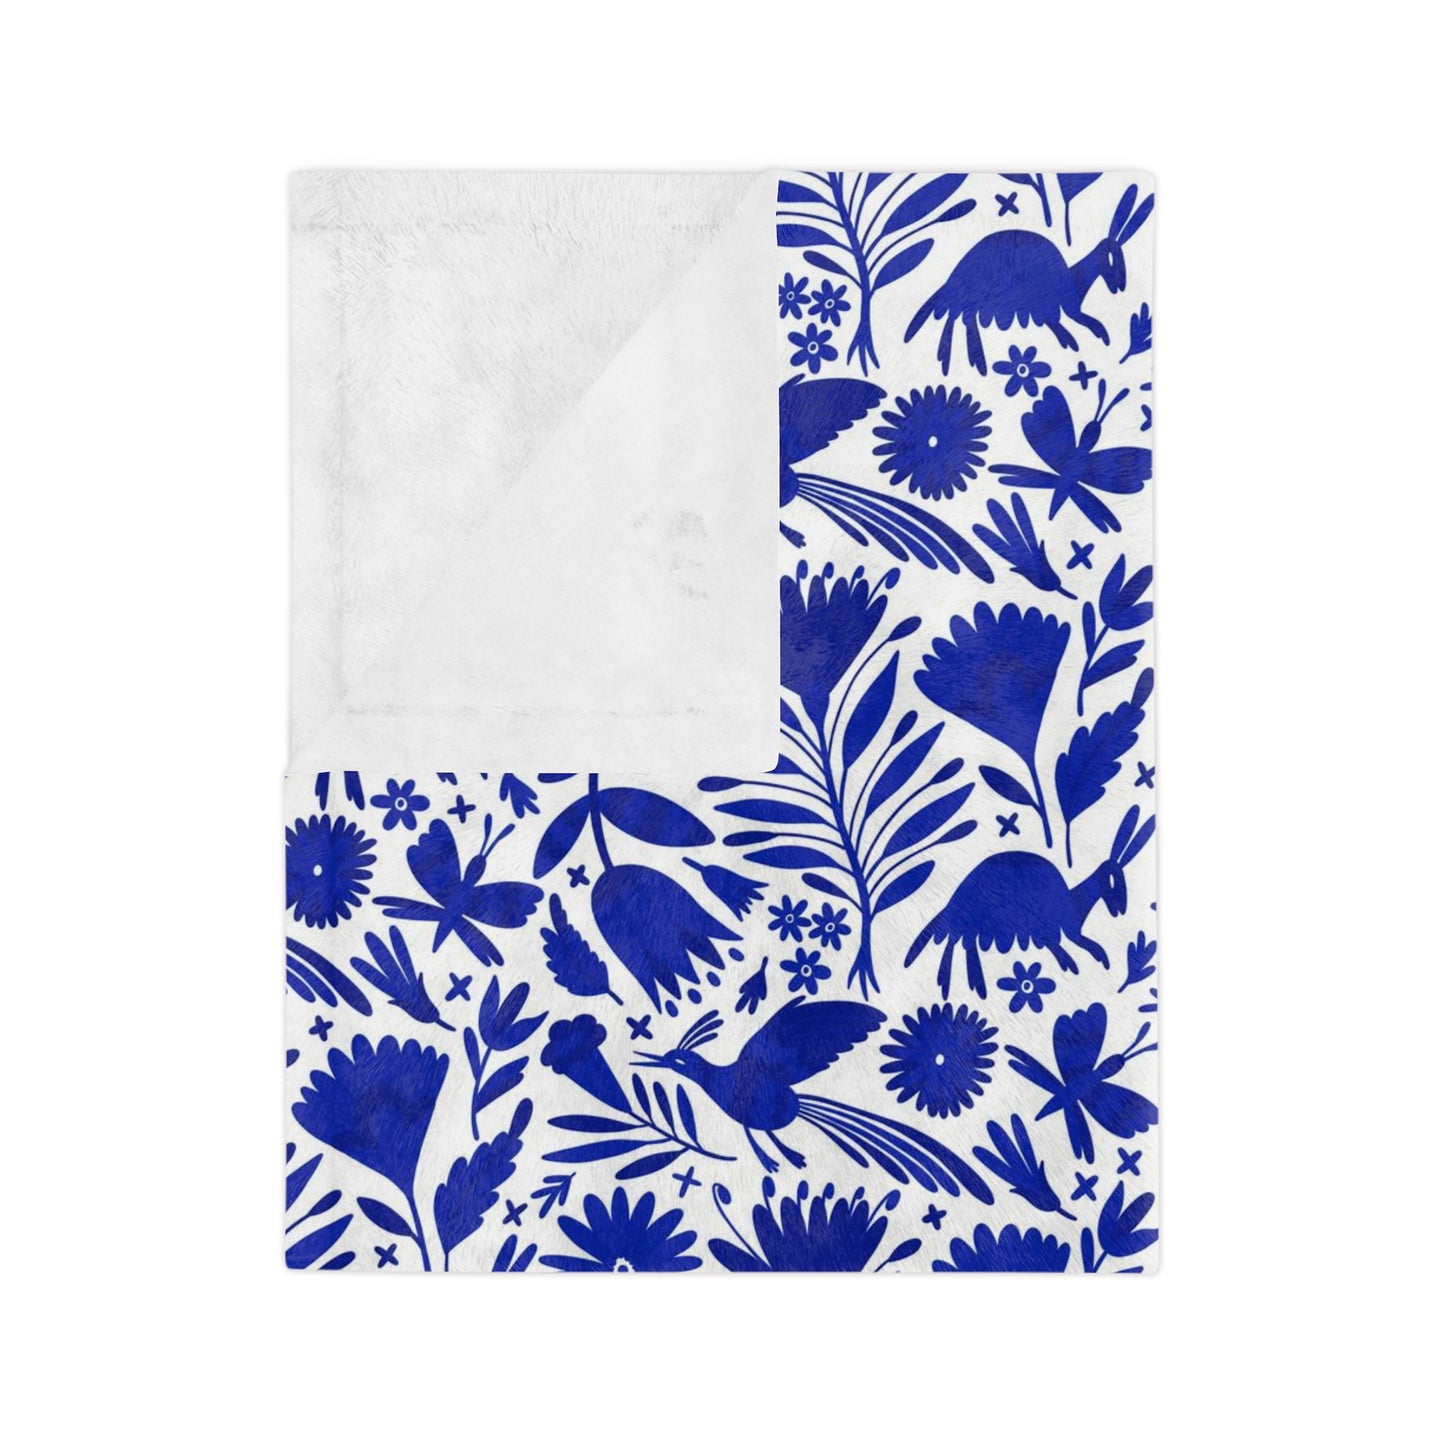 Blue and white Otomi soft blanket for Mexican home decor